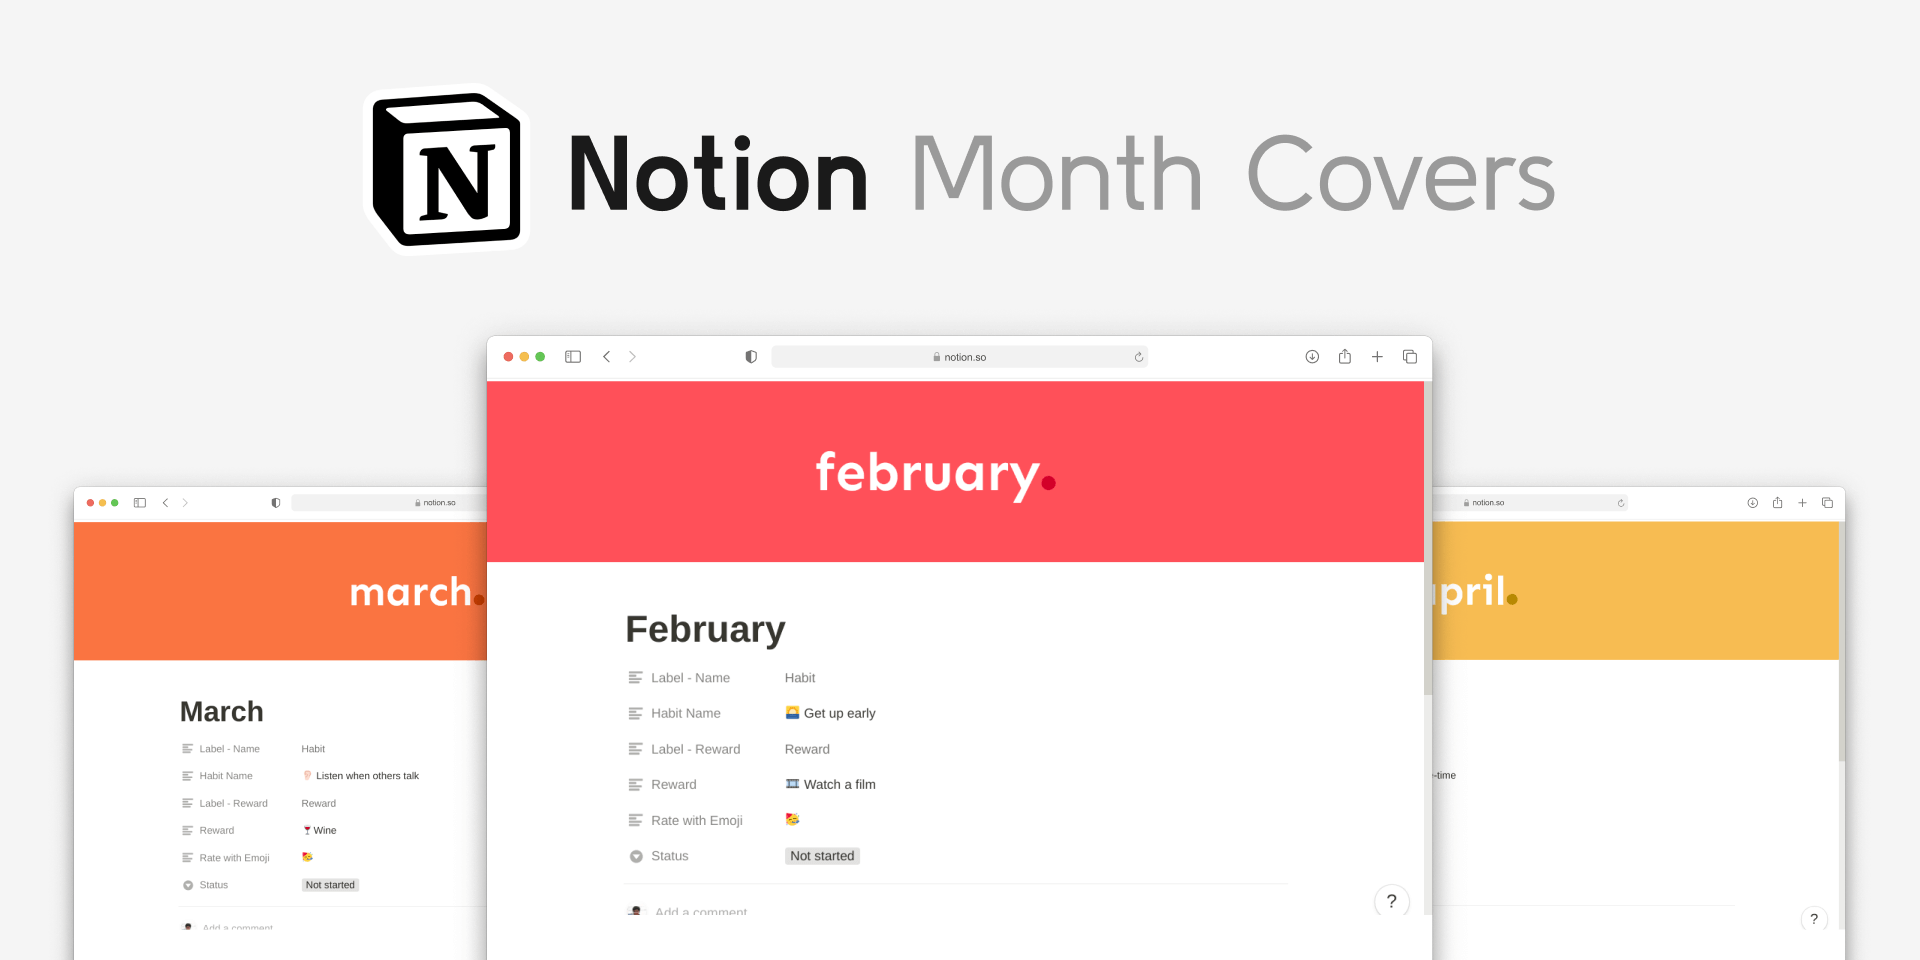 Notion Month Covers